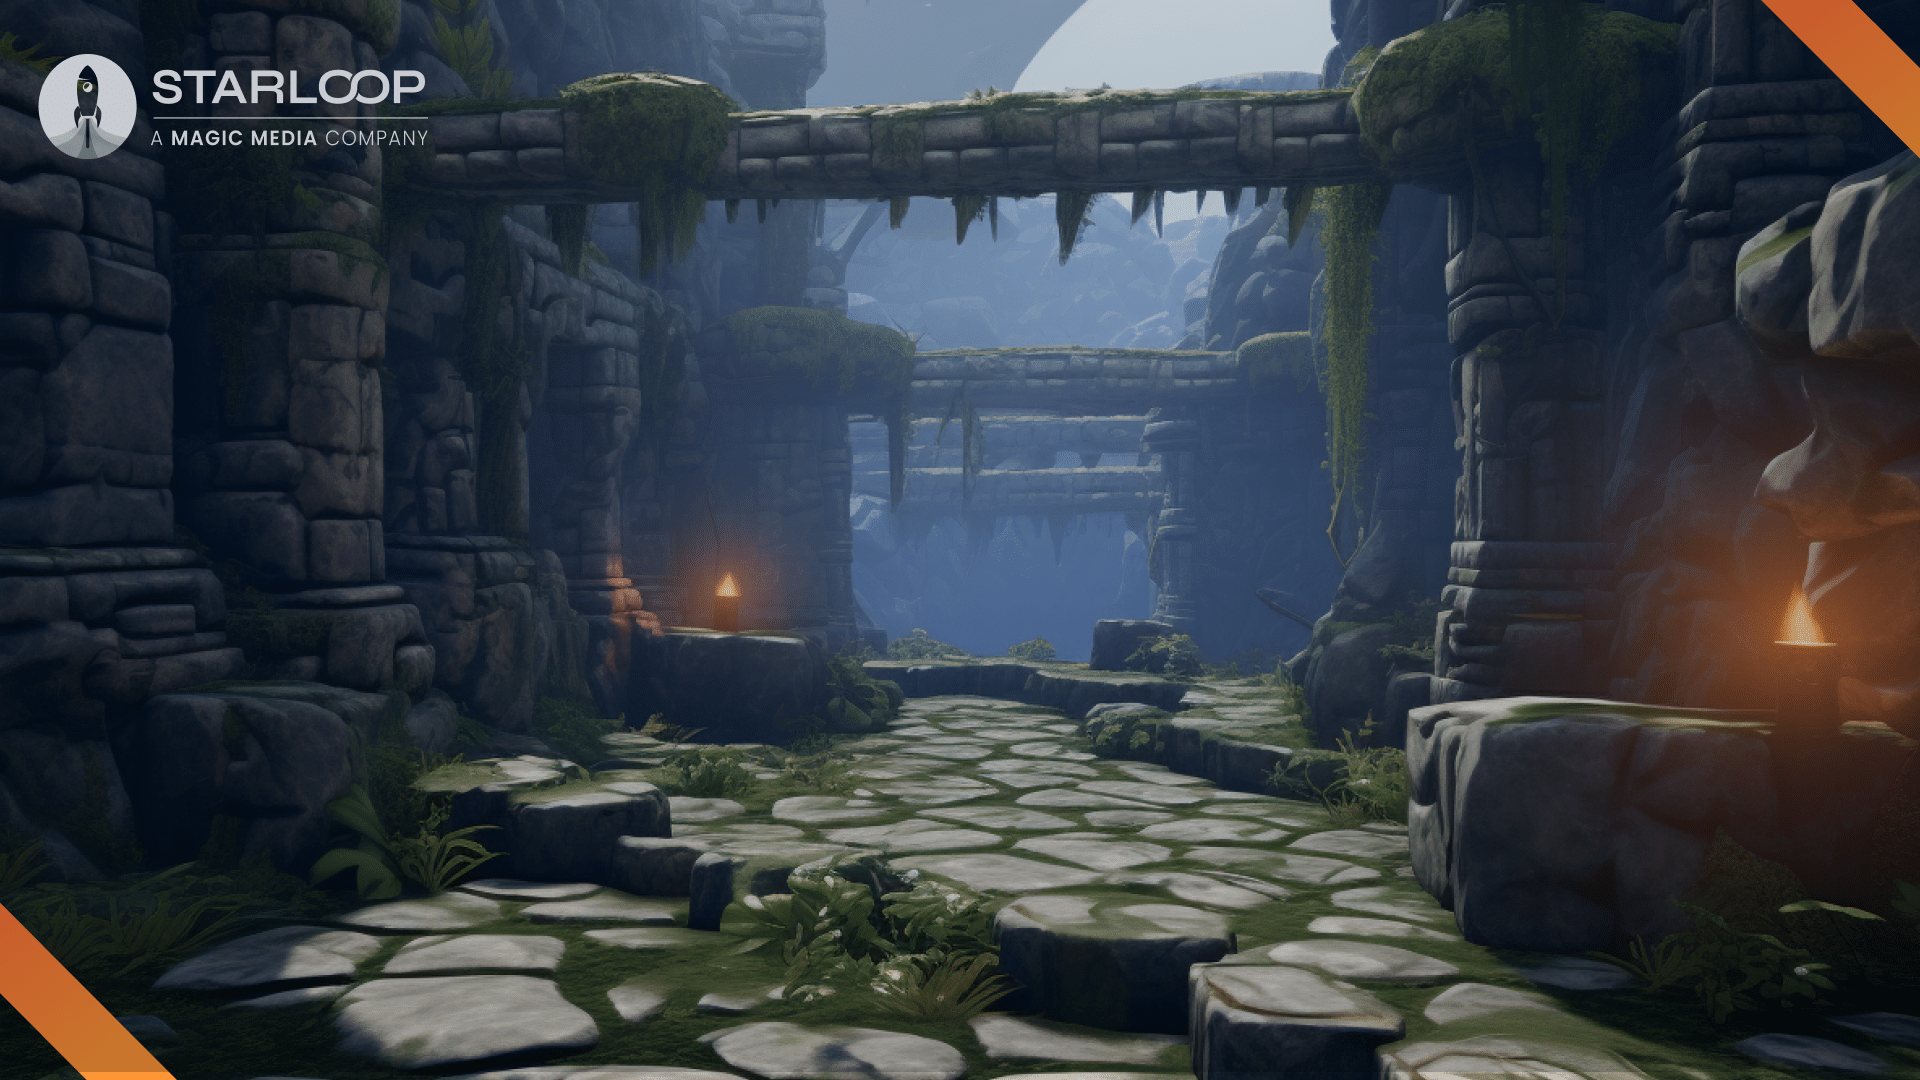 Learn How to Develop High-End Mobile Games with the Action RPG Sample  Project - Unreal Engine